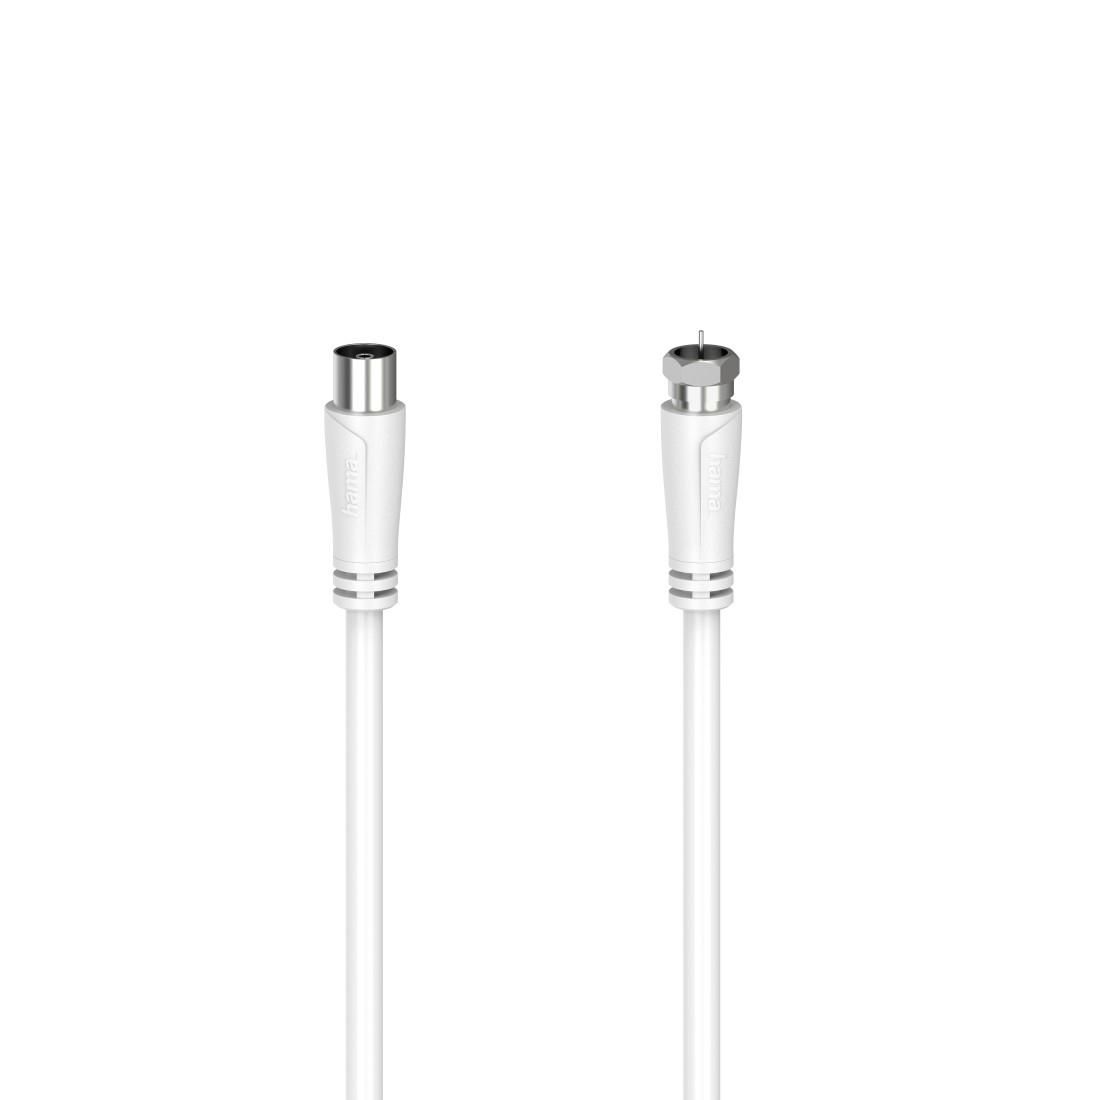 Hama 205062 W128824605 2 Coaxial Cable 3 M F White 